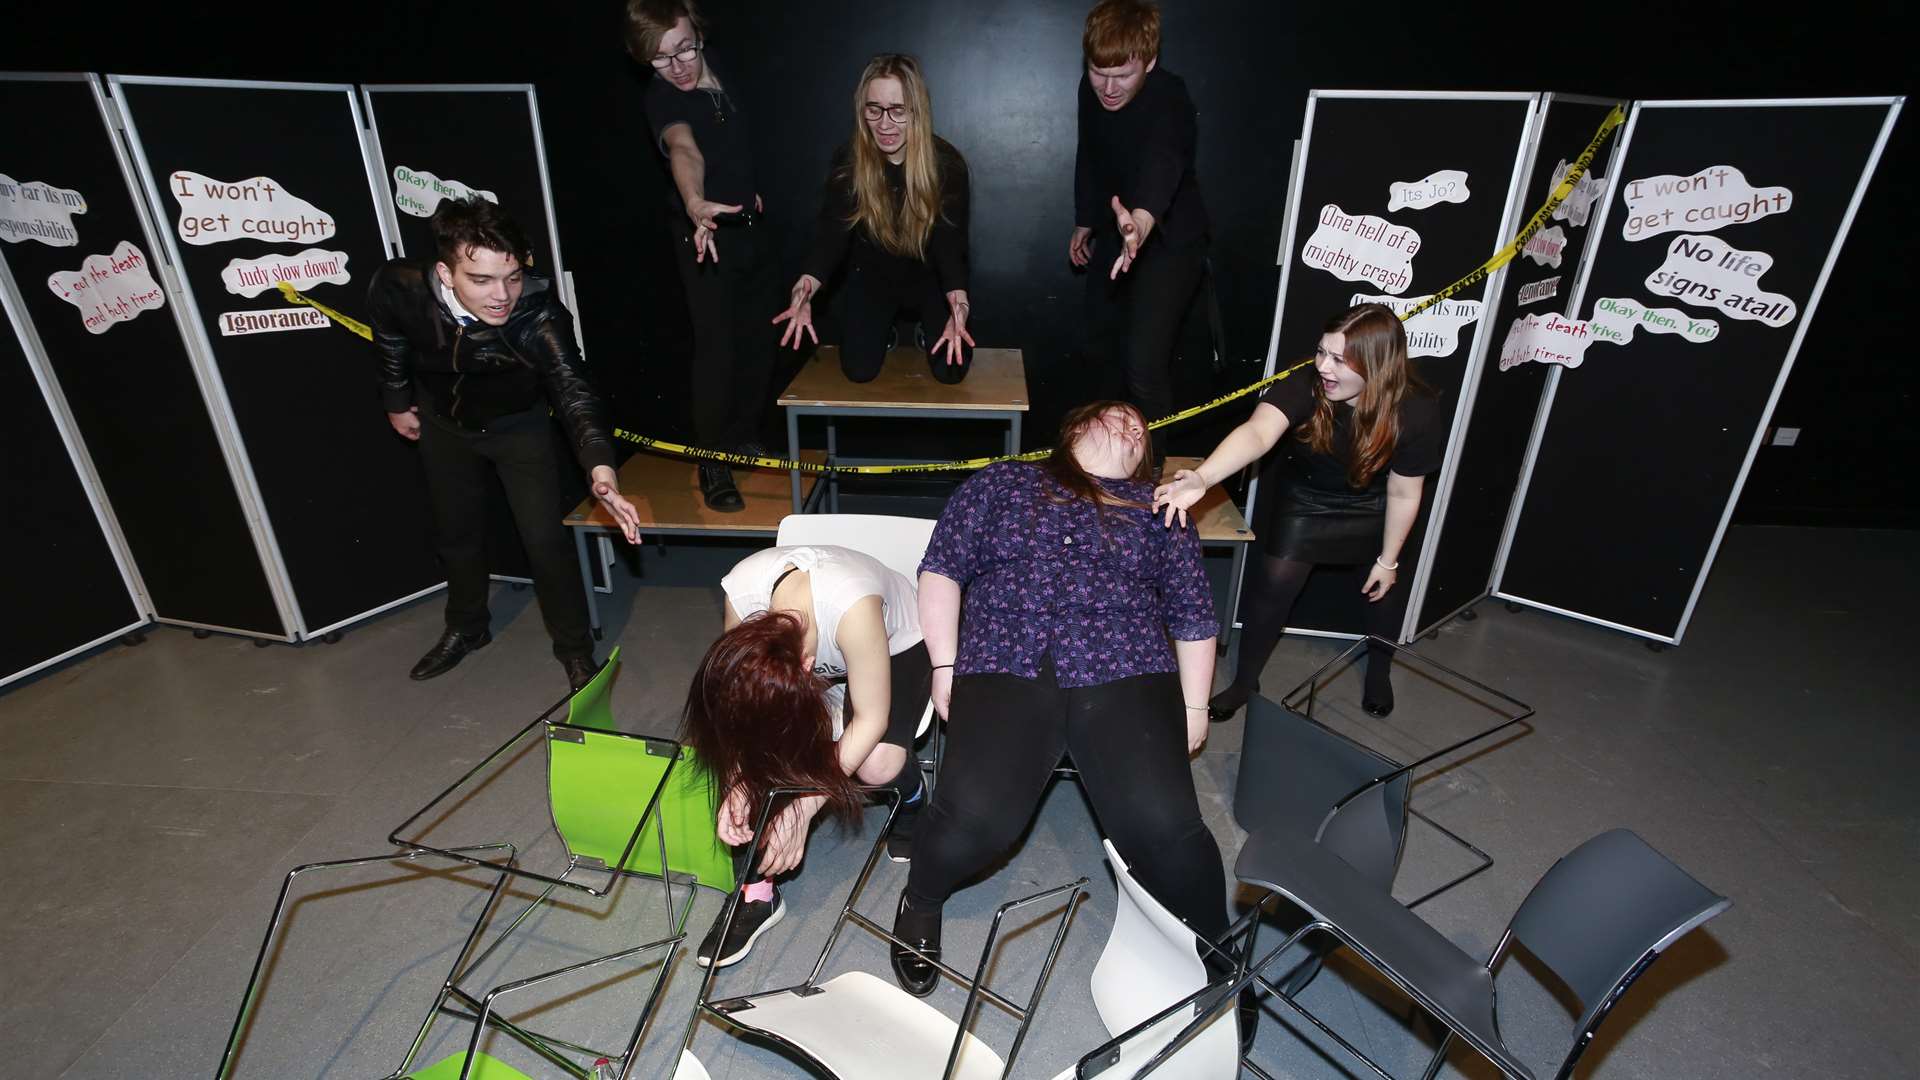 Year 12 students perform their piece about the dangers of drink driving